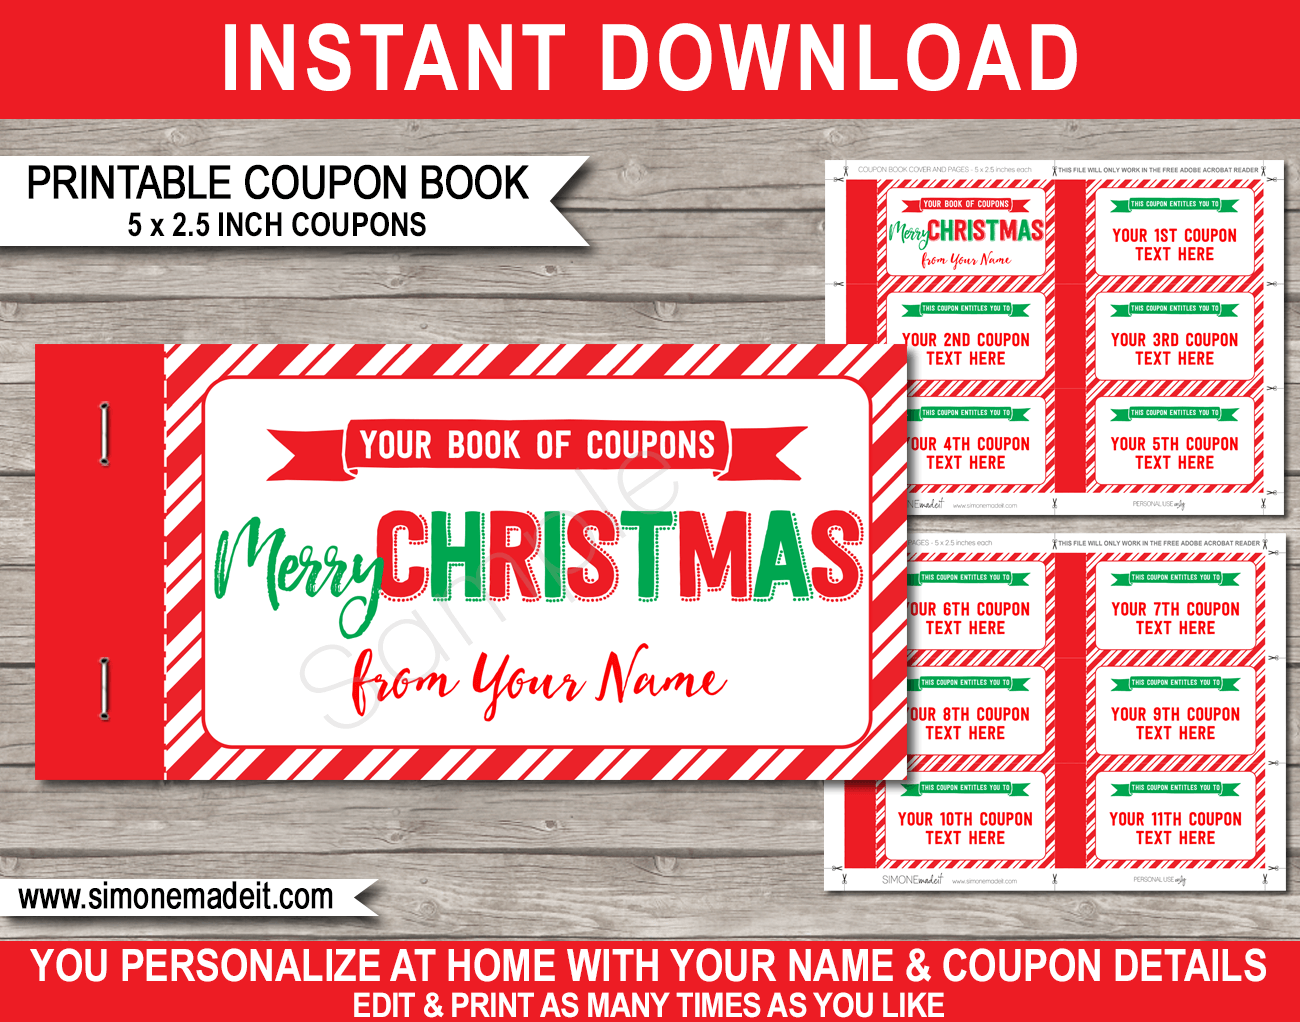 coupons-for-boyfriend-template-for-your-needs